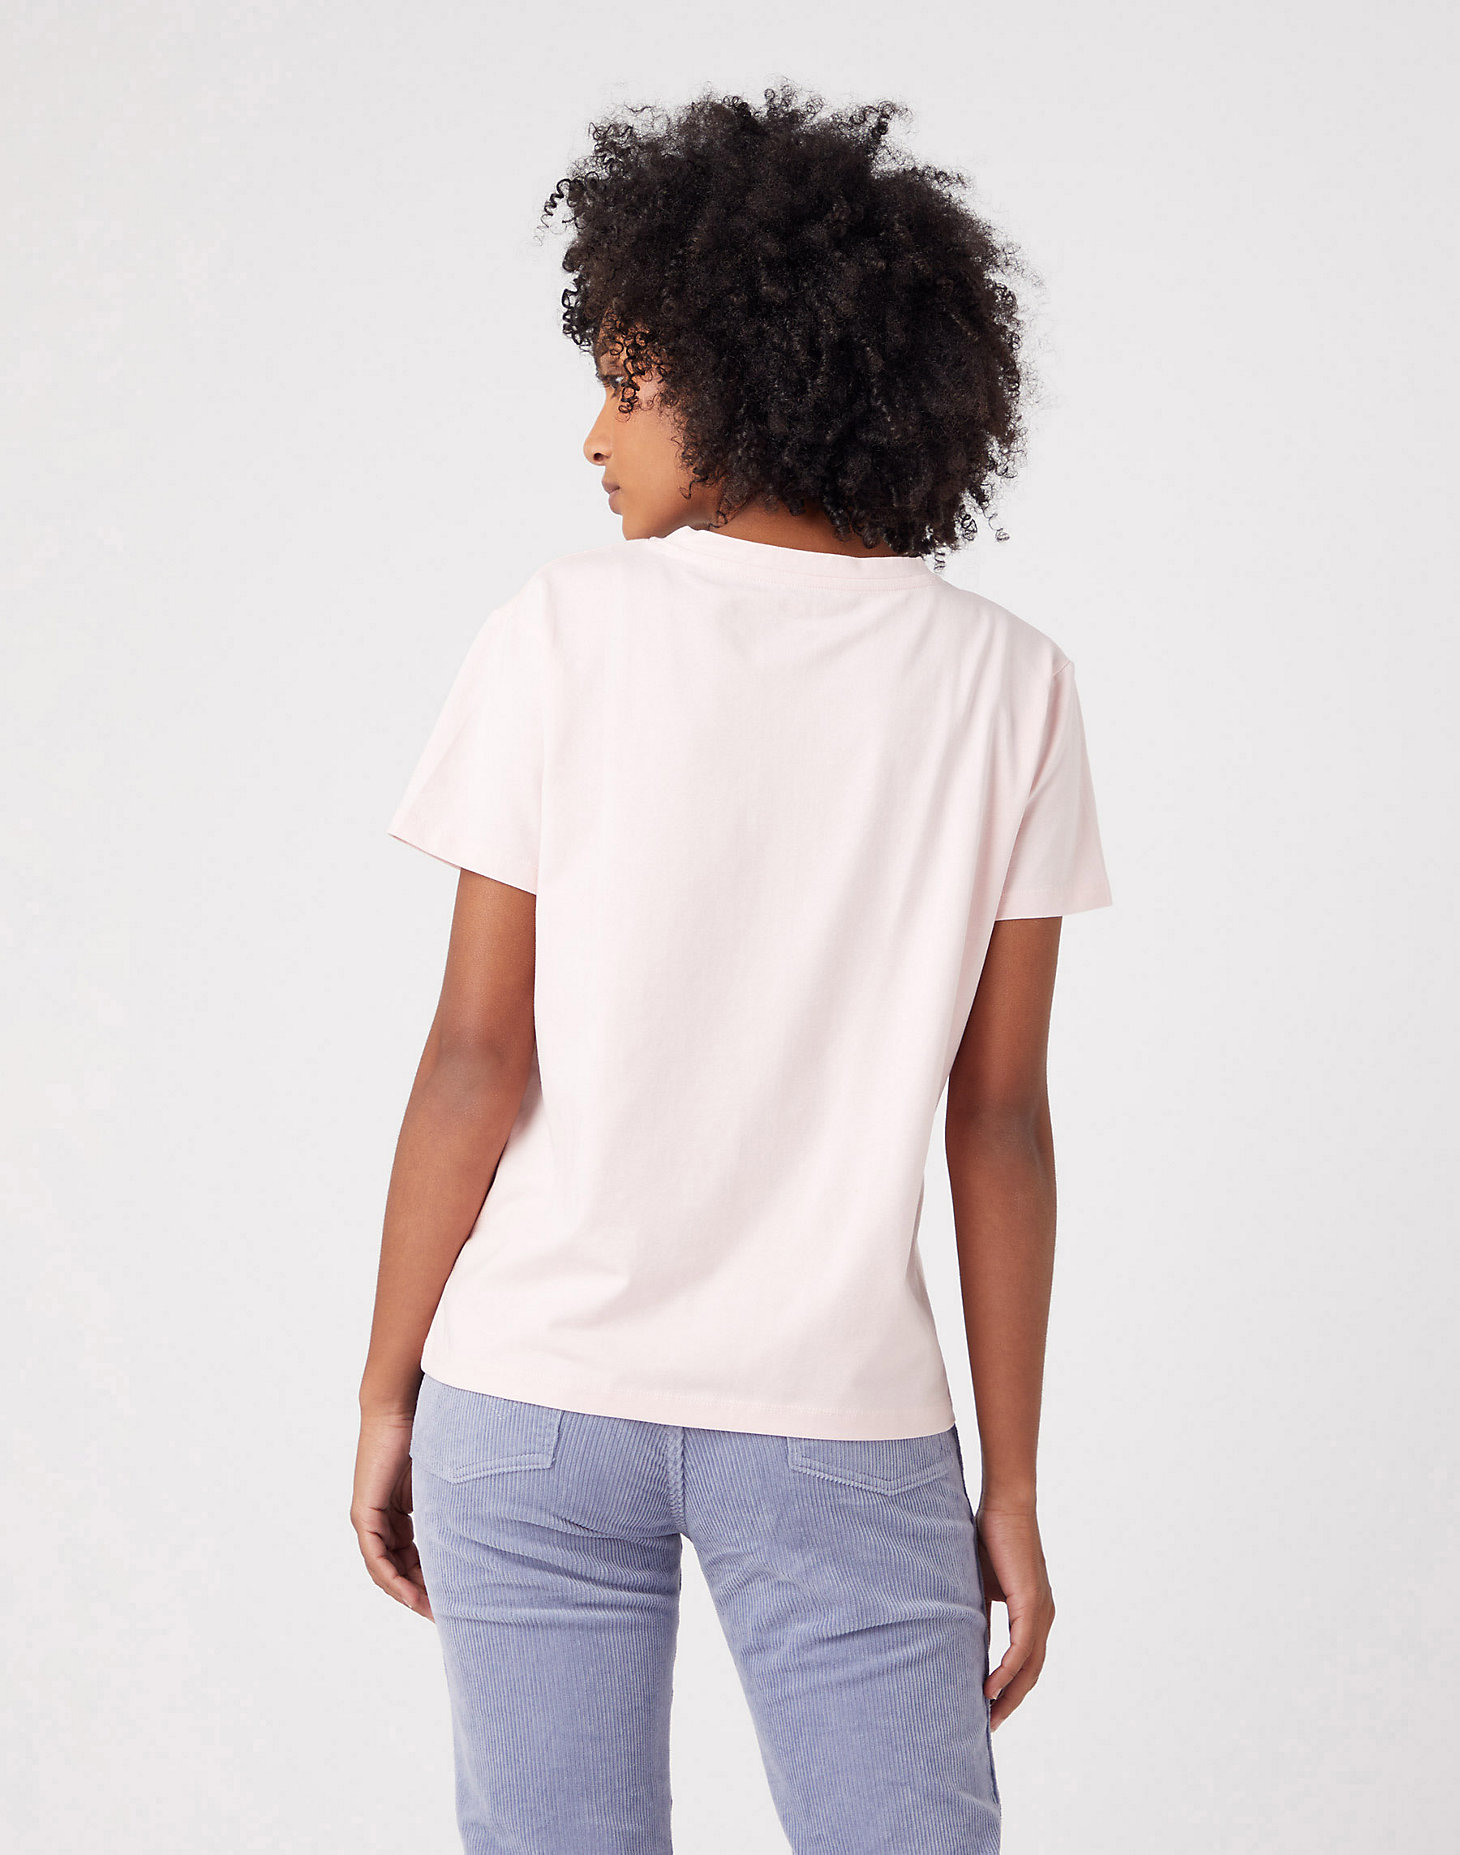 Sign Off Vneck Tee in Chalk Pink alternative view 2